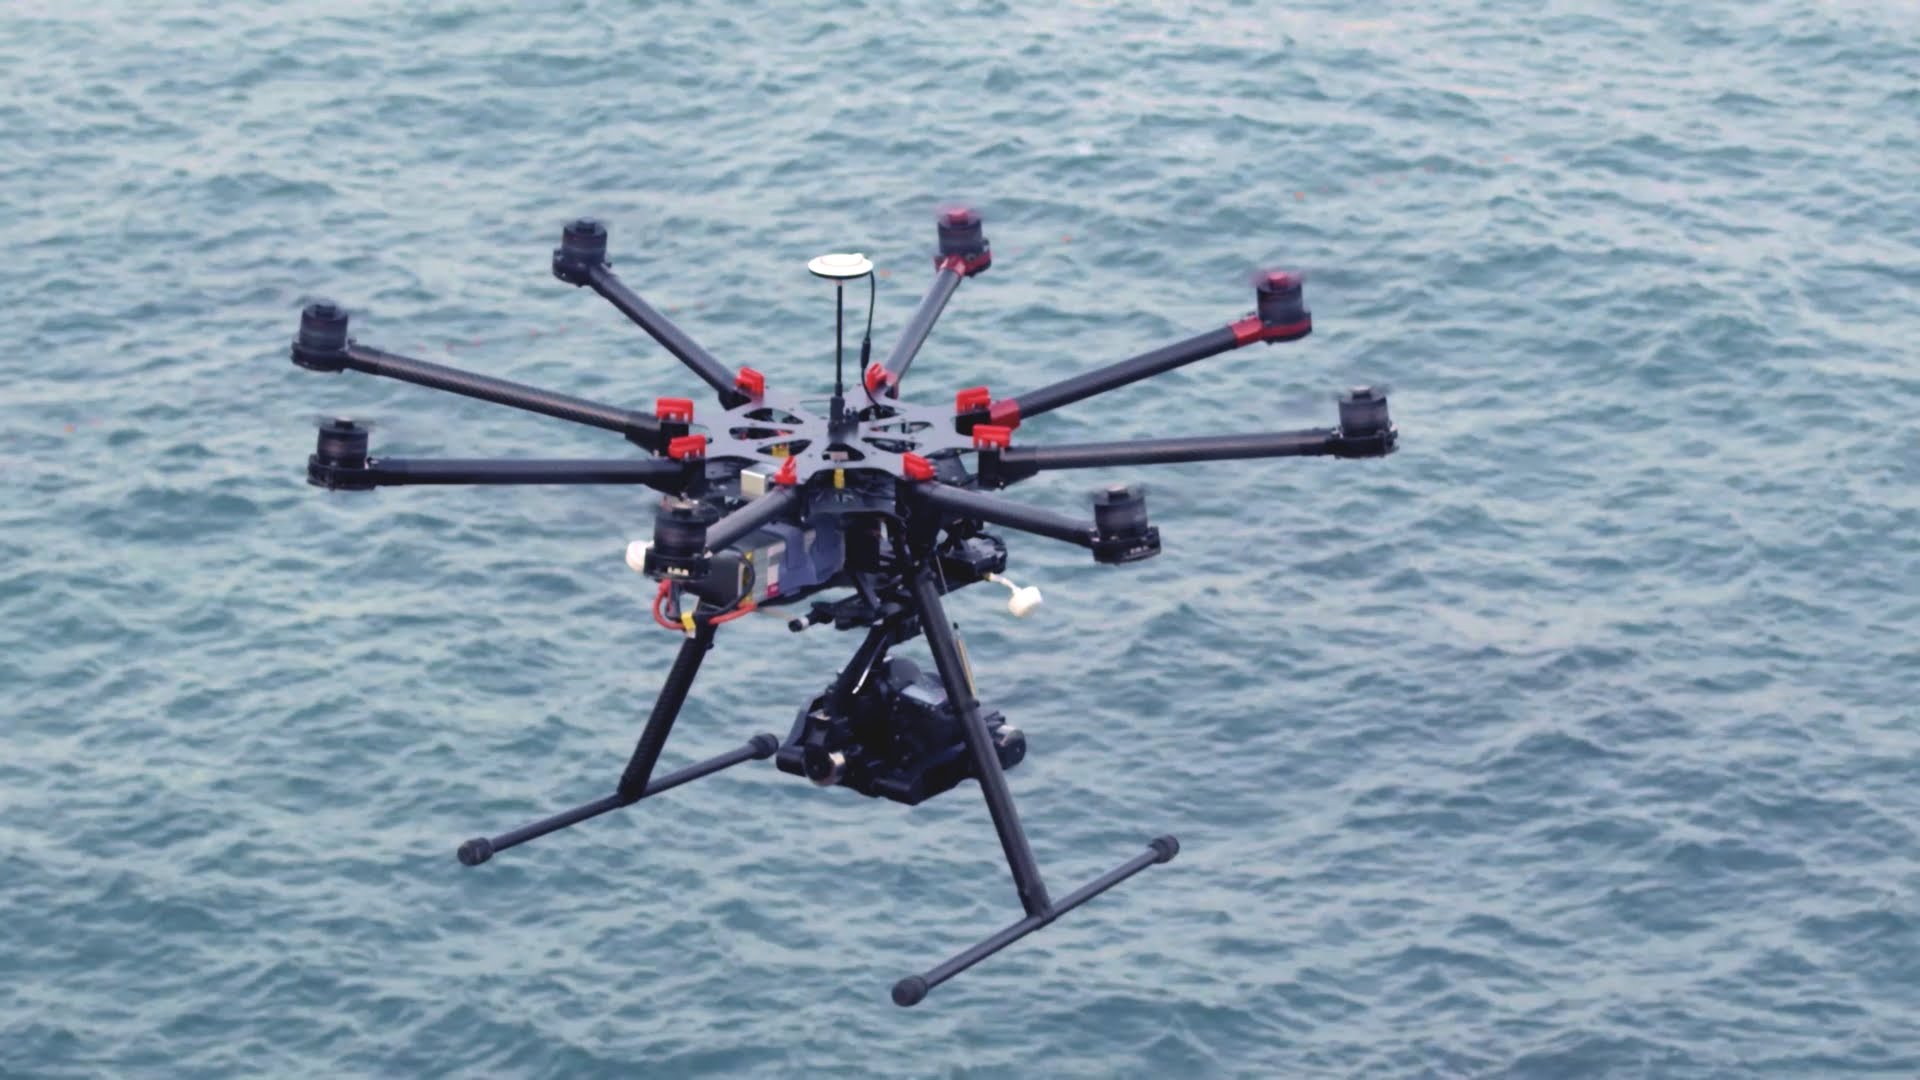 Dji Introducing The Spreading Wings S1000